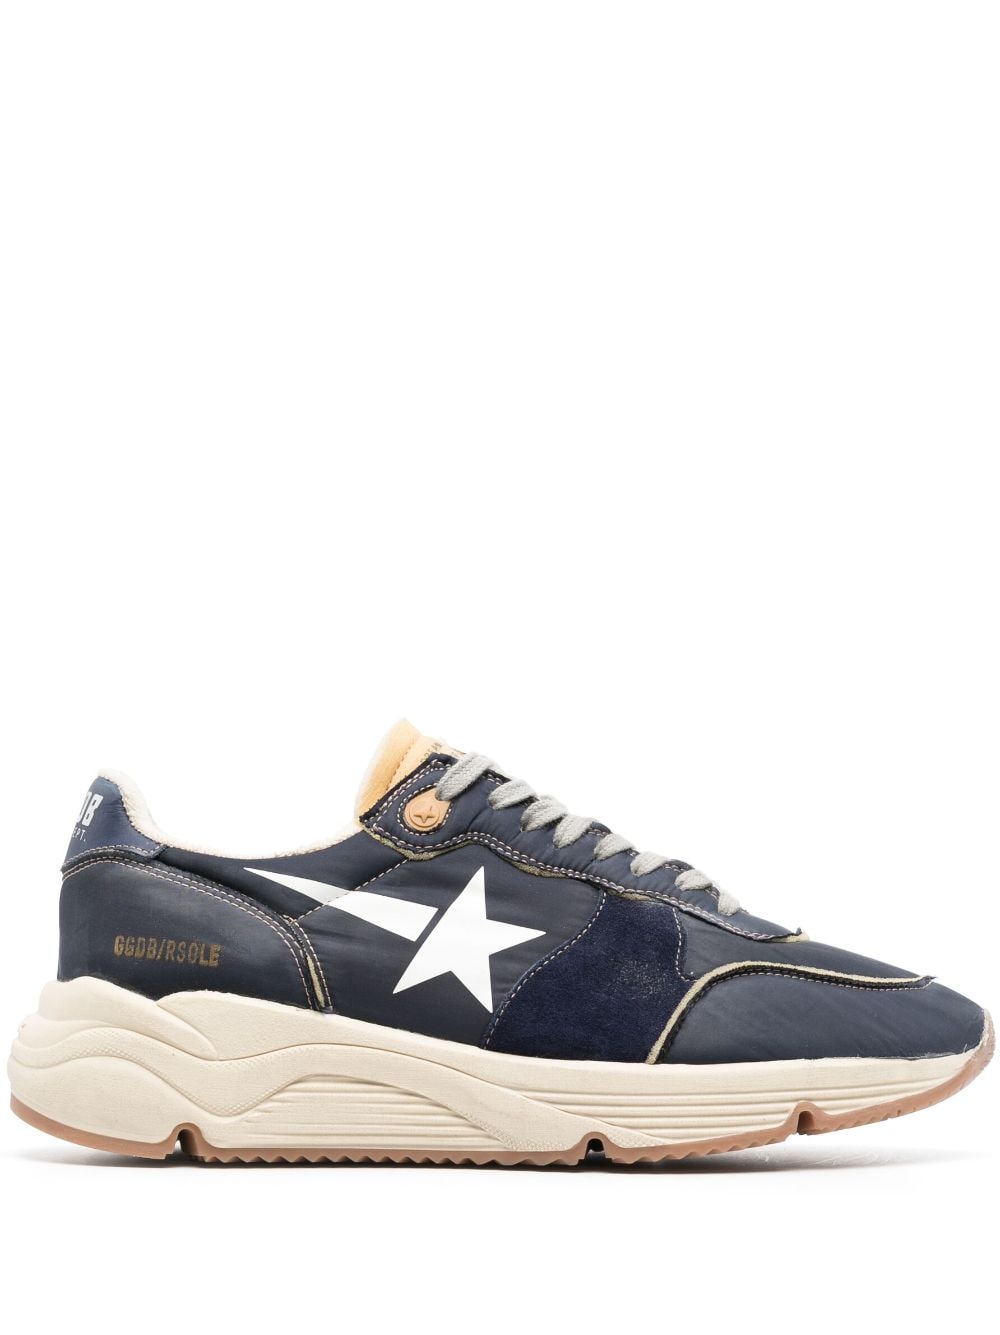 GOLDEN GOOSE RUNNING SOLE LEATHER trainers